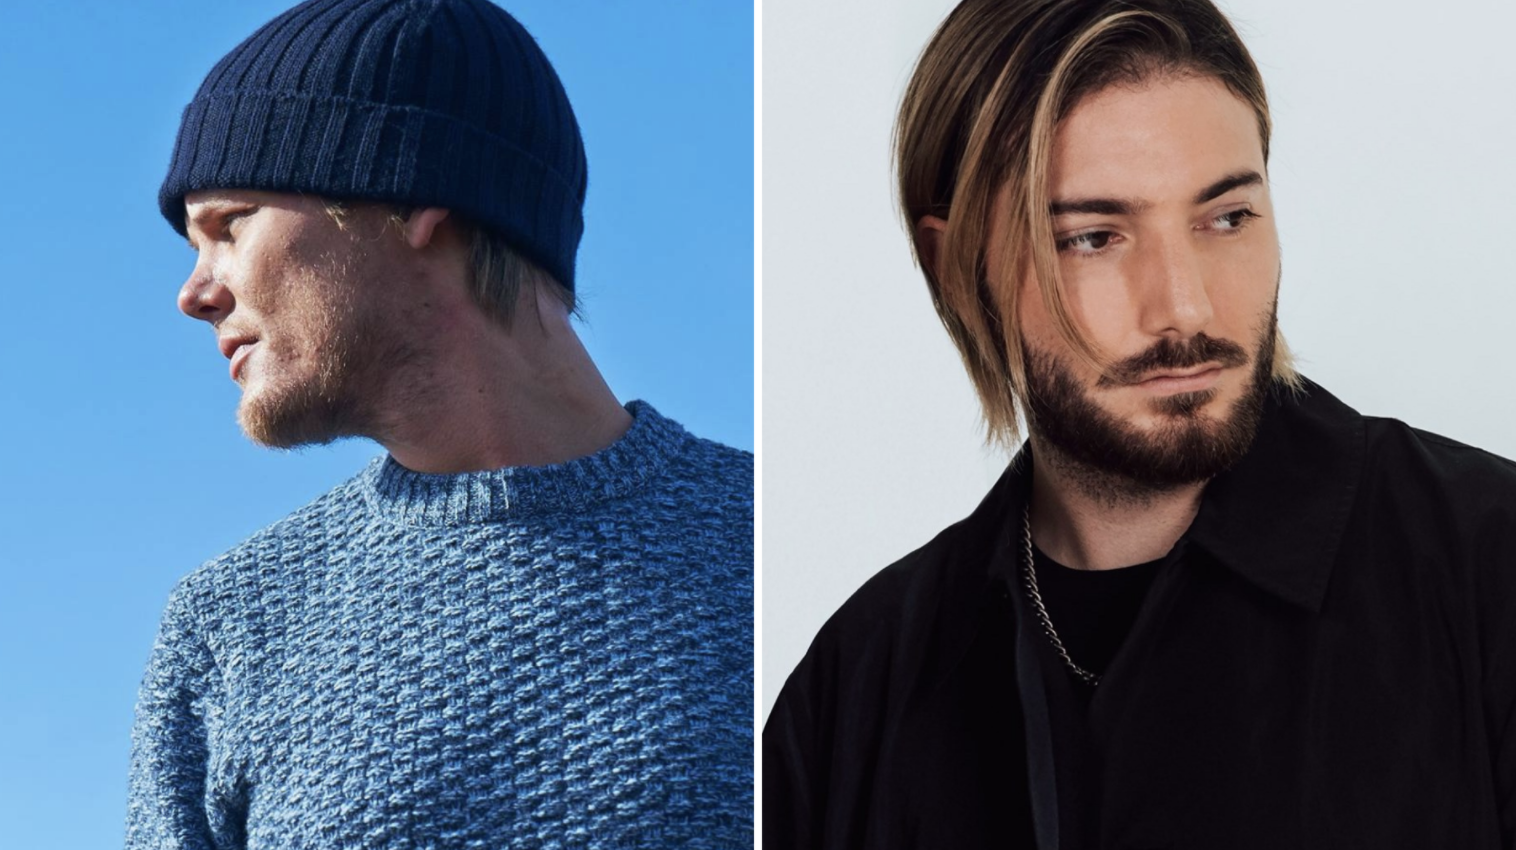 Dance-music star Alesso opens up about Avicii's suicide